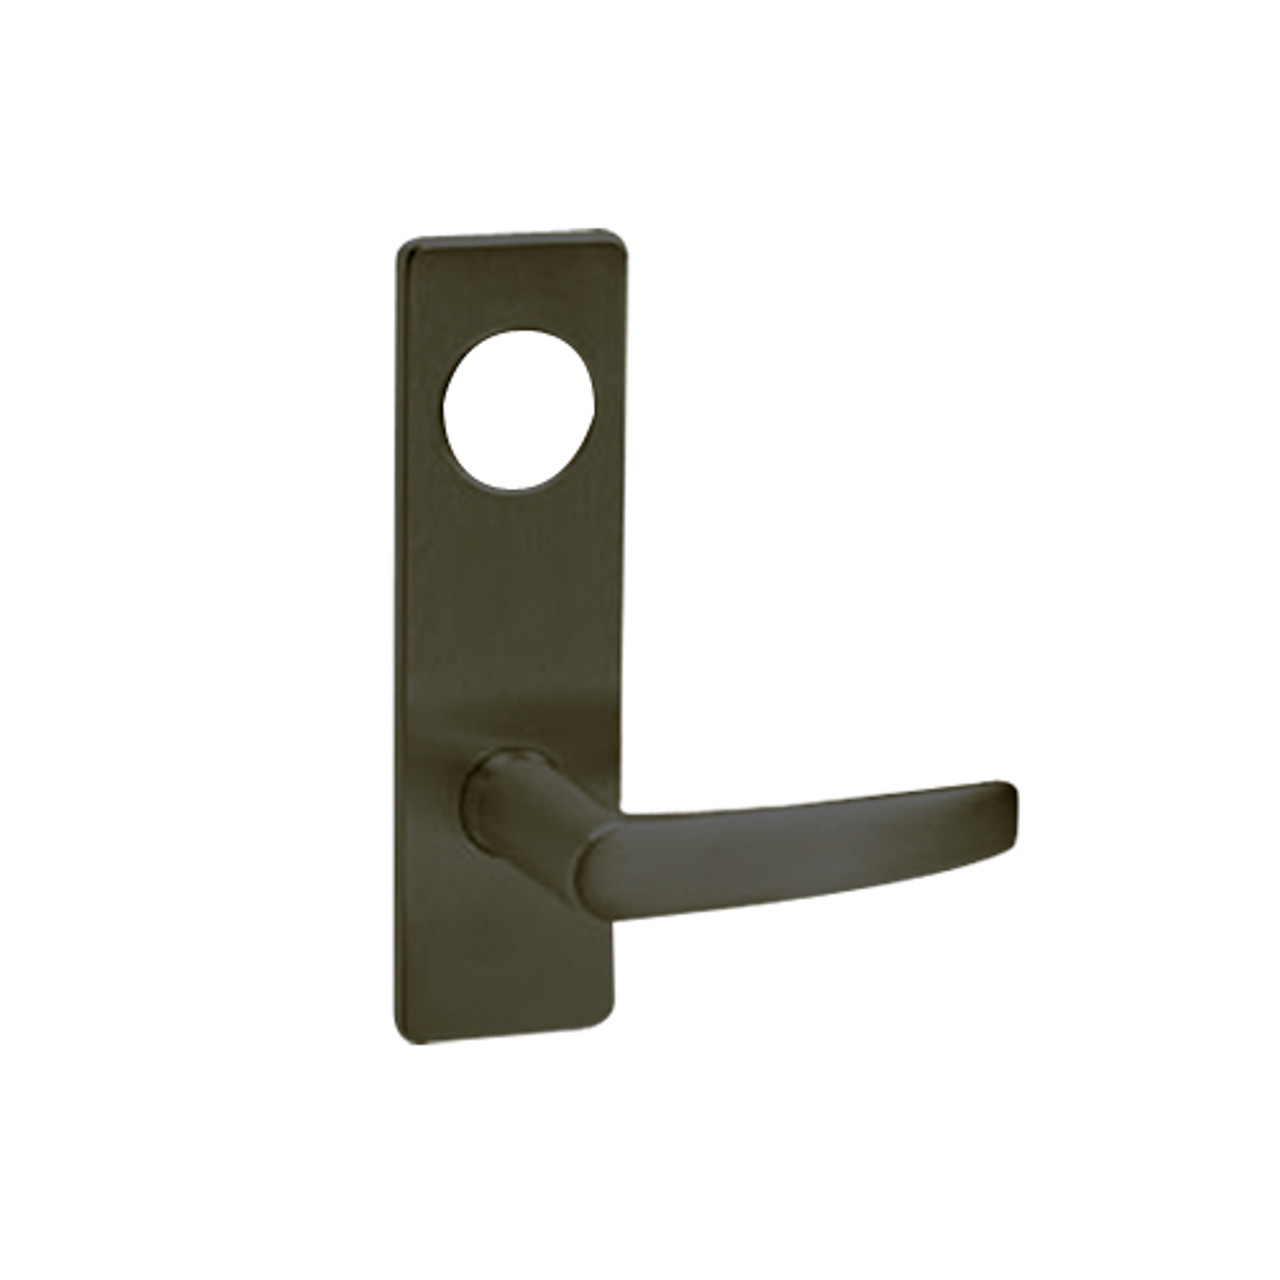 ML2032-ASP-613-LC Corbin Russwin ML2000 Series Mortise Institution Locksets with Armstrong Lever in Oil Rubbed Bronze